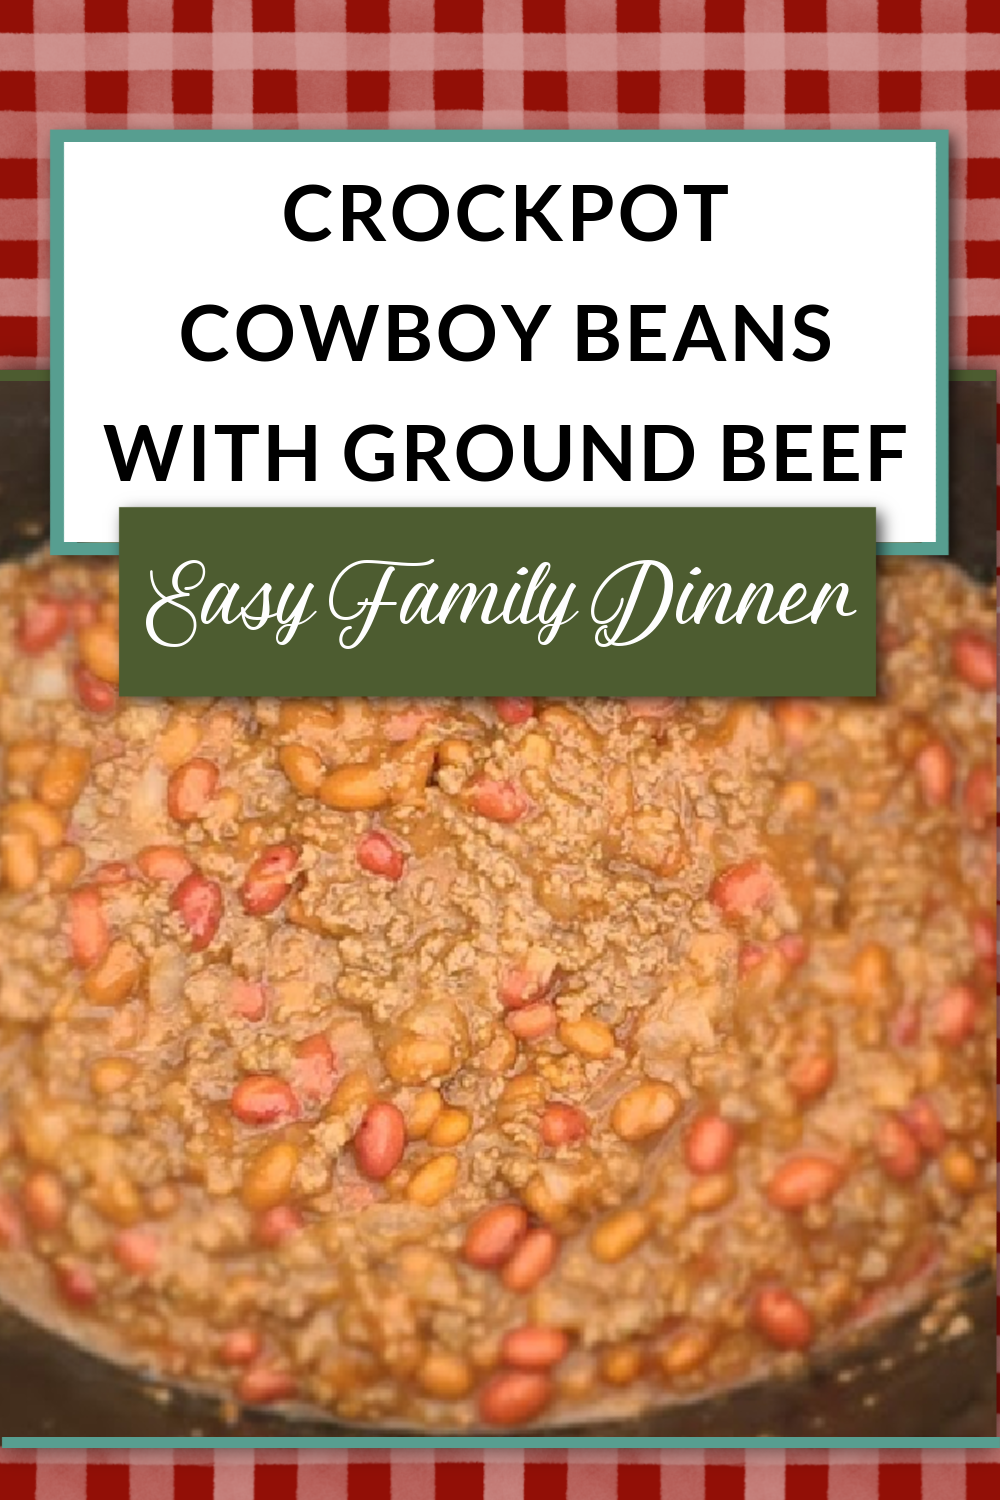 Crockpot cowboy beans with beef